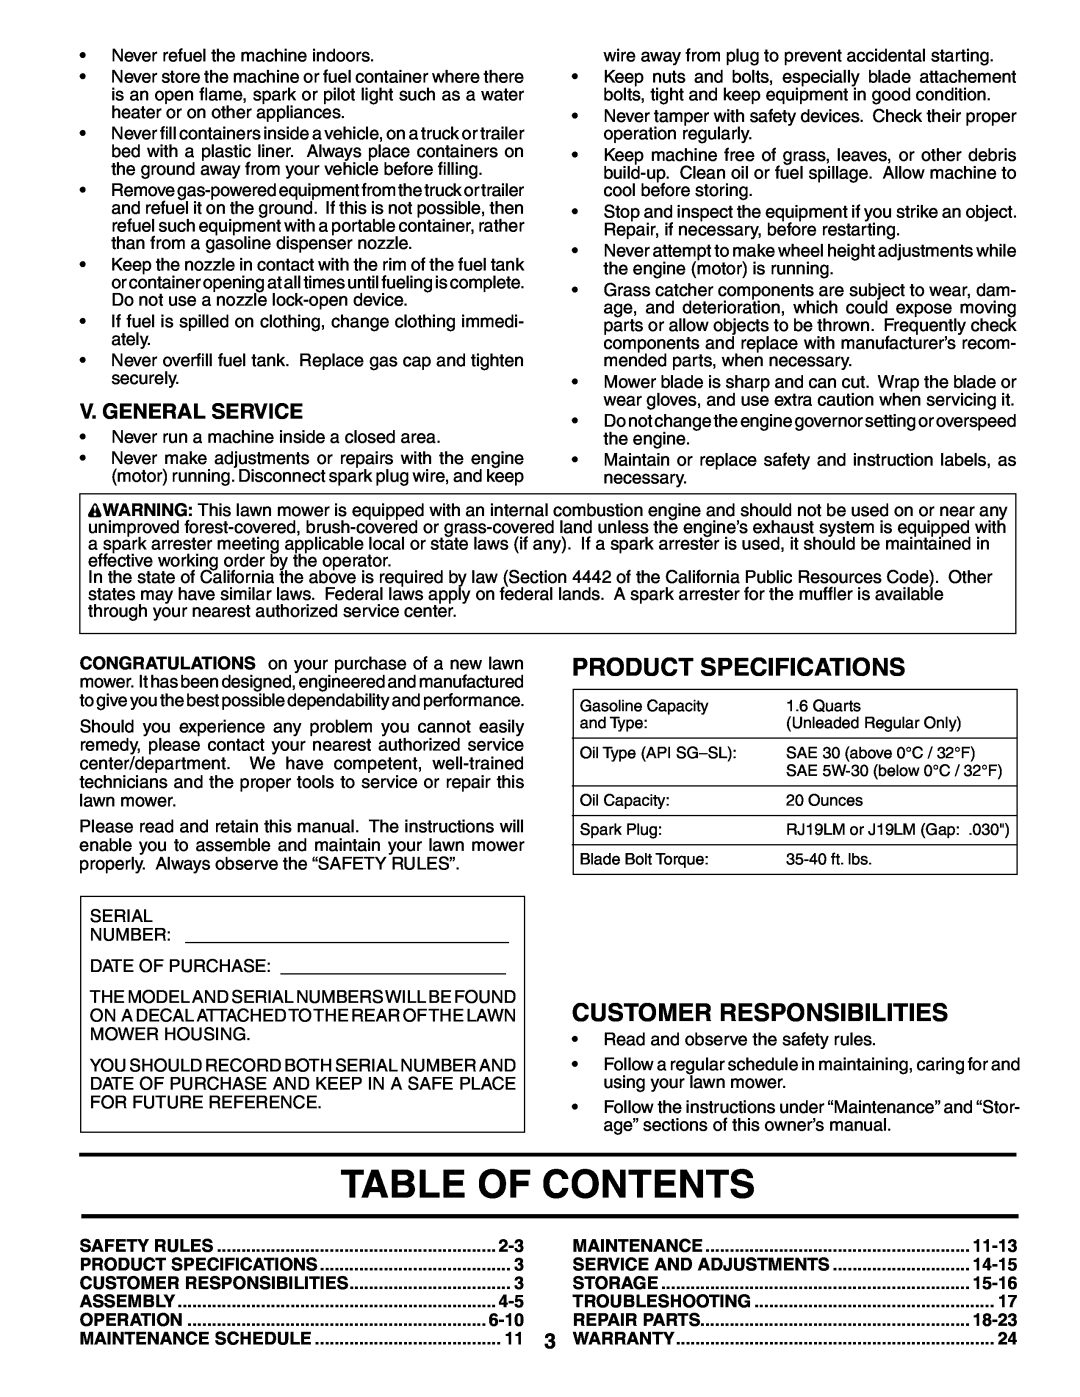 Husqvarna 67521HVE Table Of Contents, Product Specifications, Customer Responsibilities, V. General Service, 6-10, 11-13 